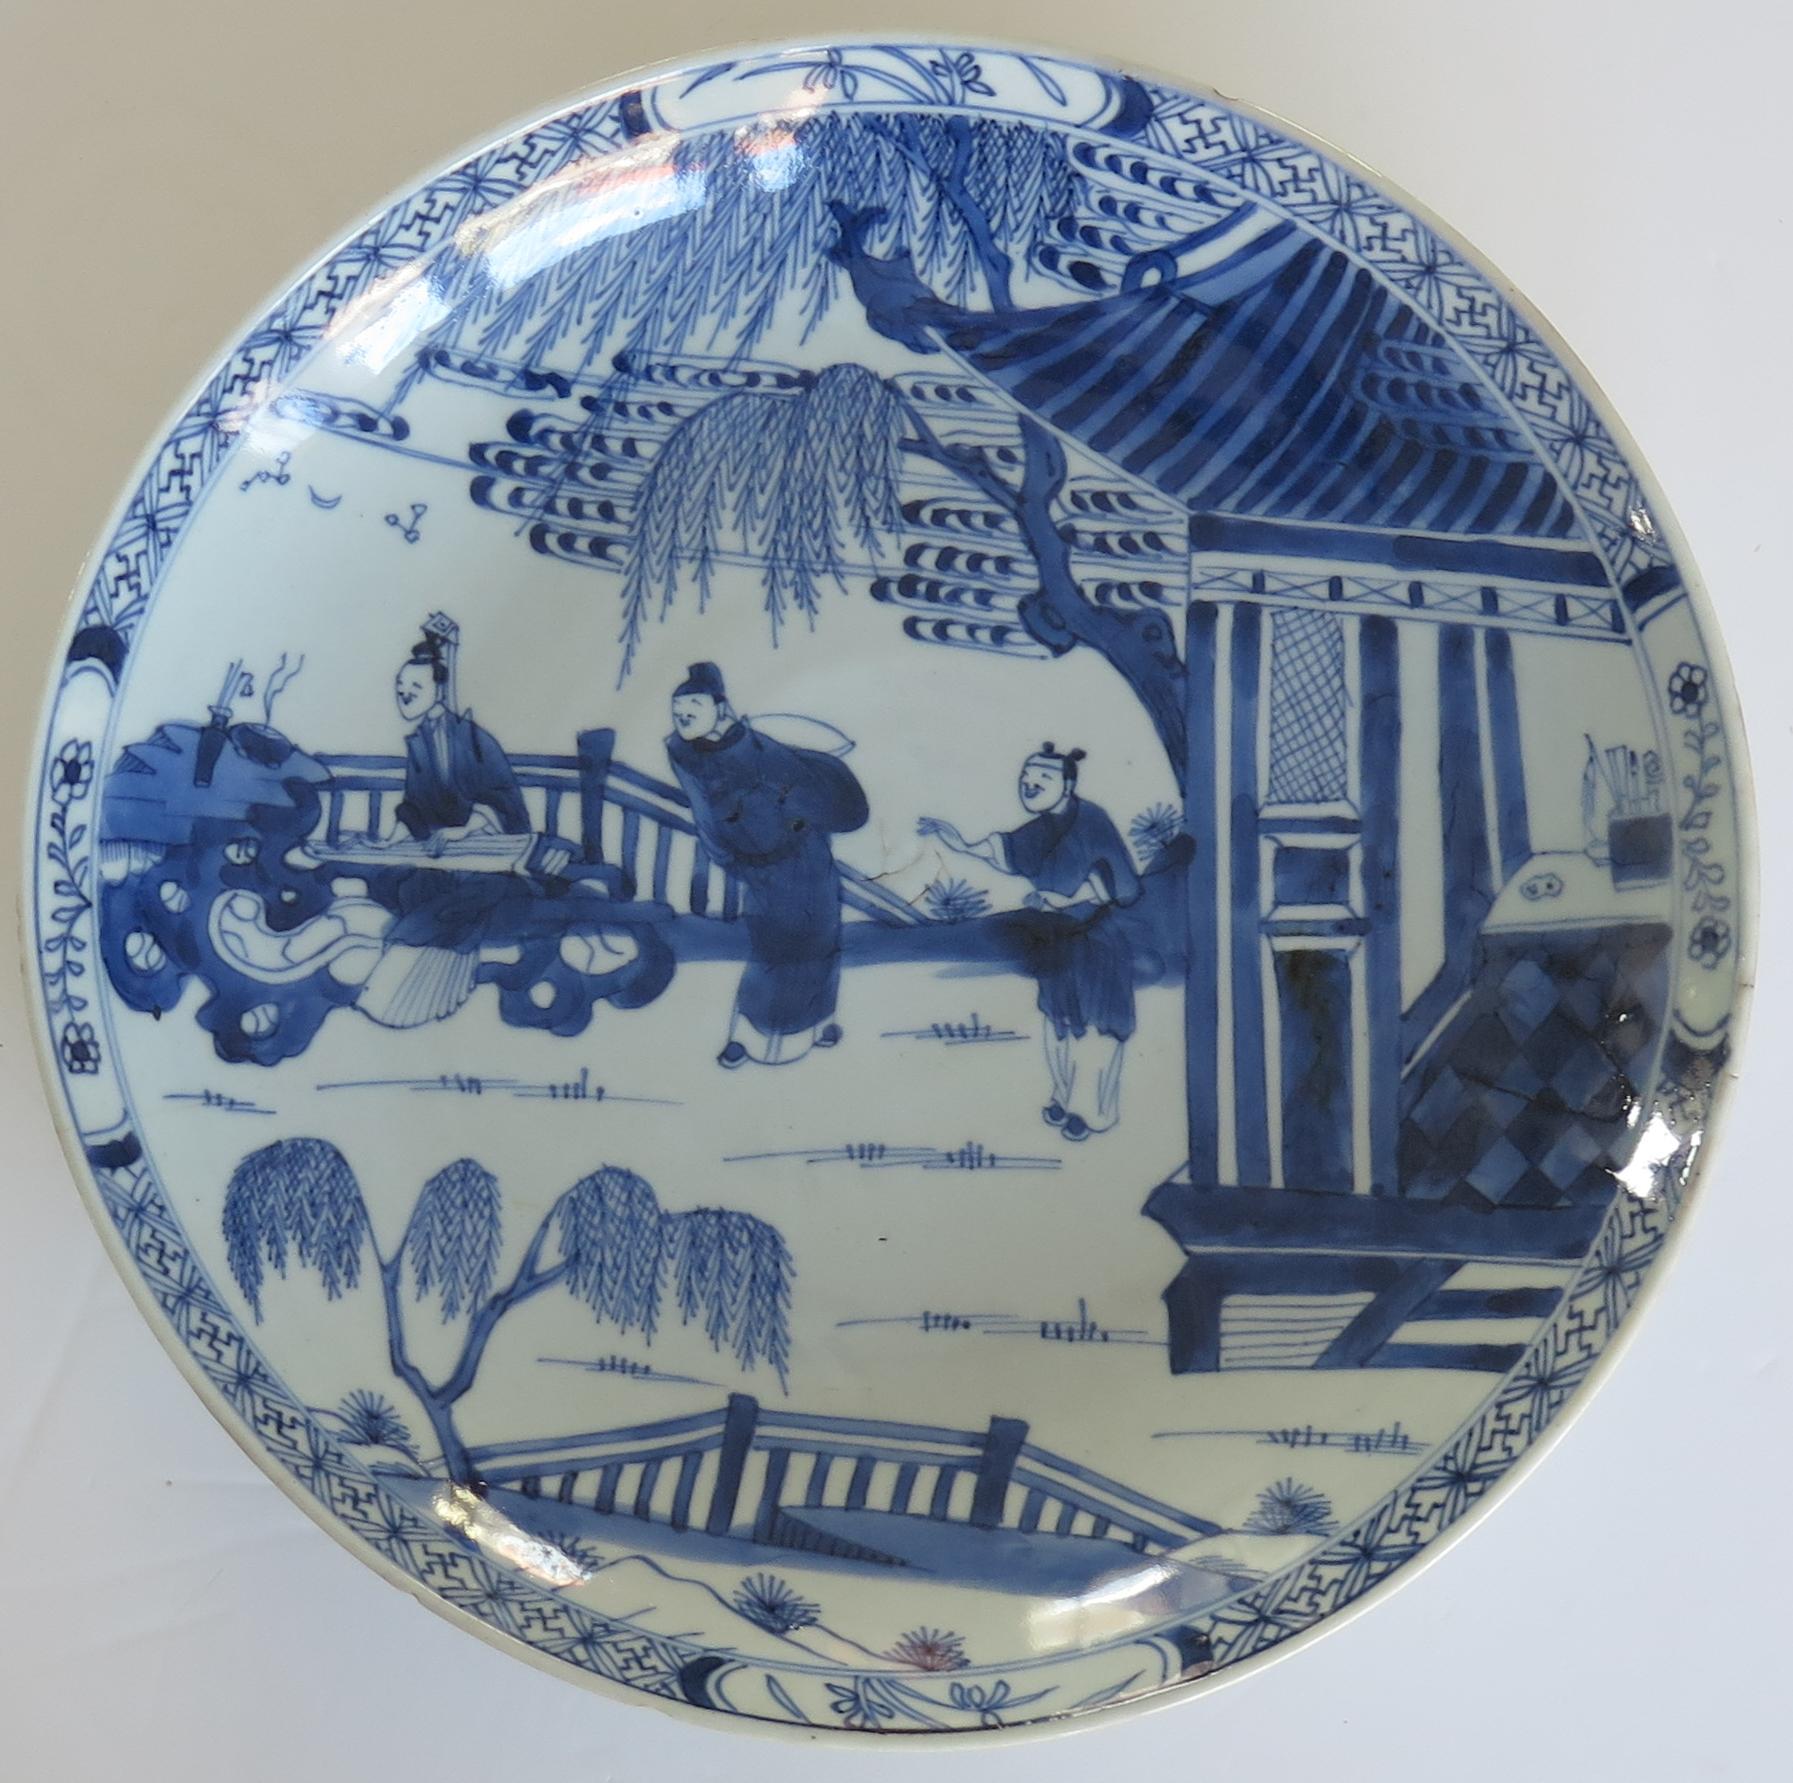 This is a very beautifully hand painted Chinese porcelain blue and white large Dish or Plate from the Qing, Kangxi period, 1662-1722, dating to Circa 1690.

This is a large fairly deep plate measuring 11.15 inches ( about 282 mm) diameter, which